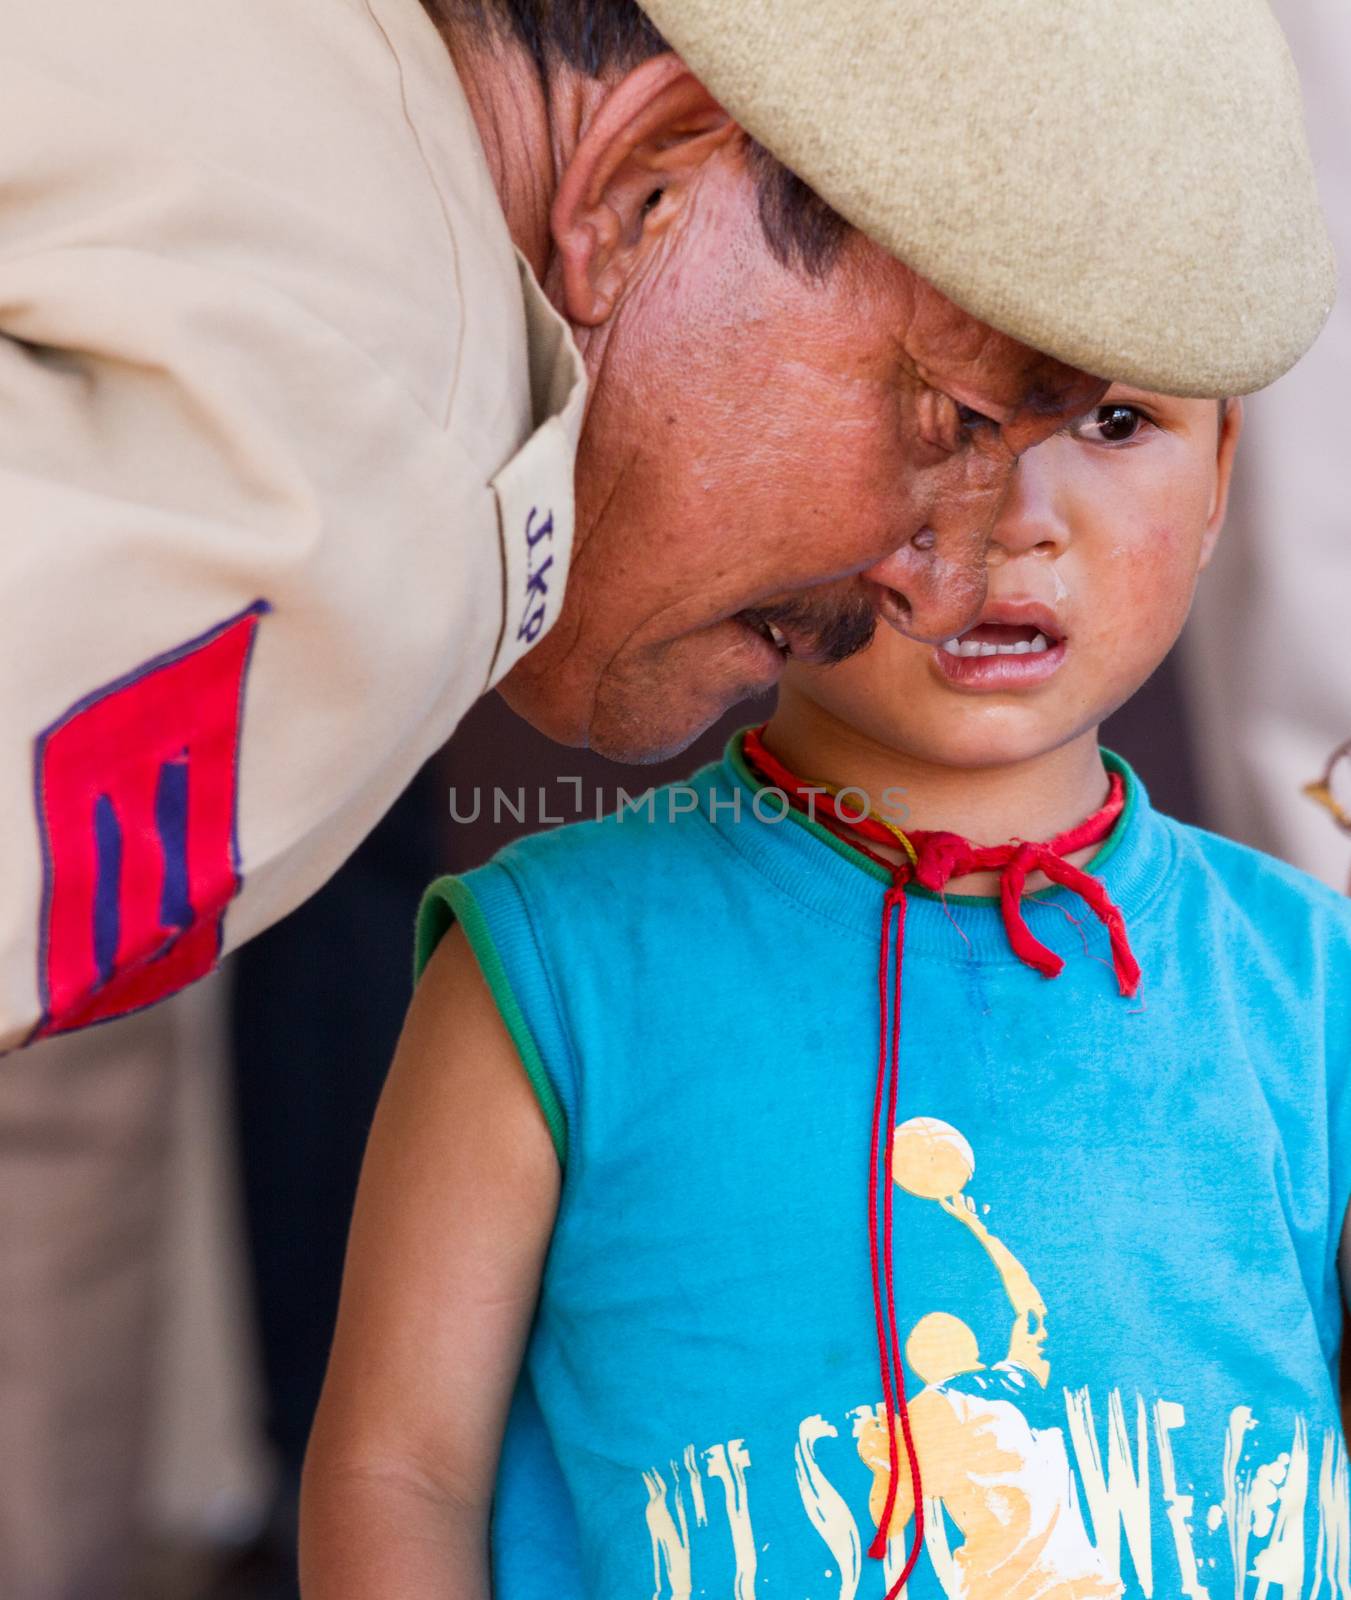 Leh, India - August 7, 2012: Military man comforting a crying baby boy at the His Holiness the 14th Dalai Lama teachings in Leh, Ladakh, Jammu and Kashmir, India